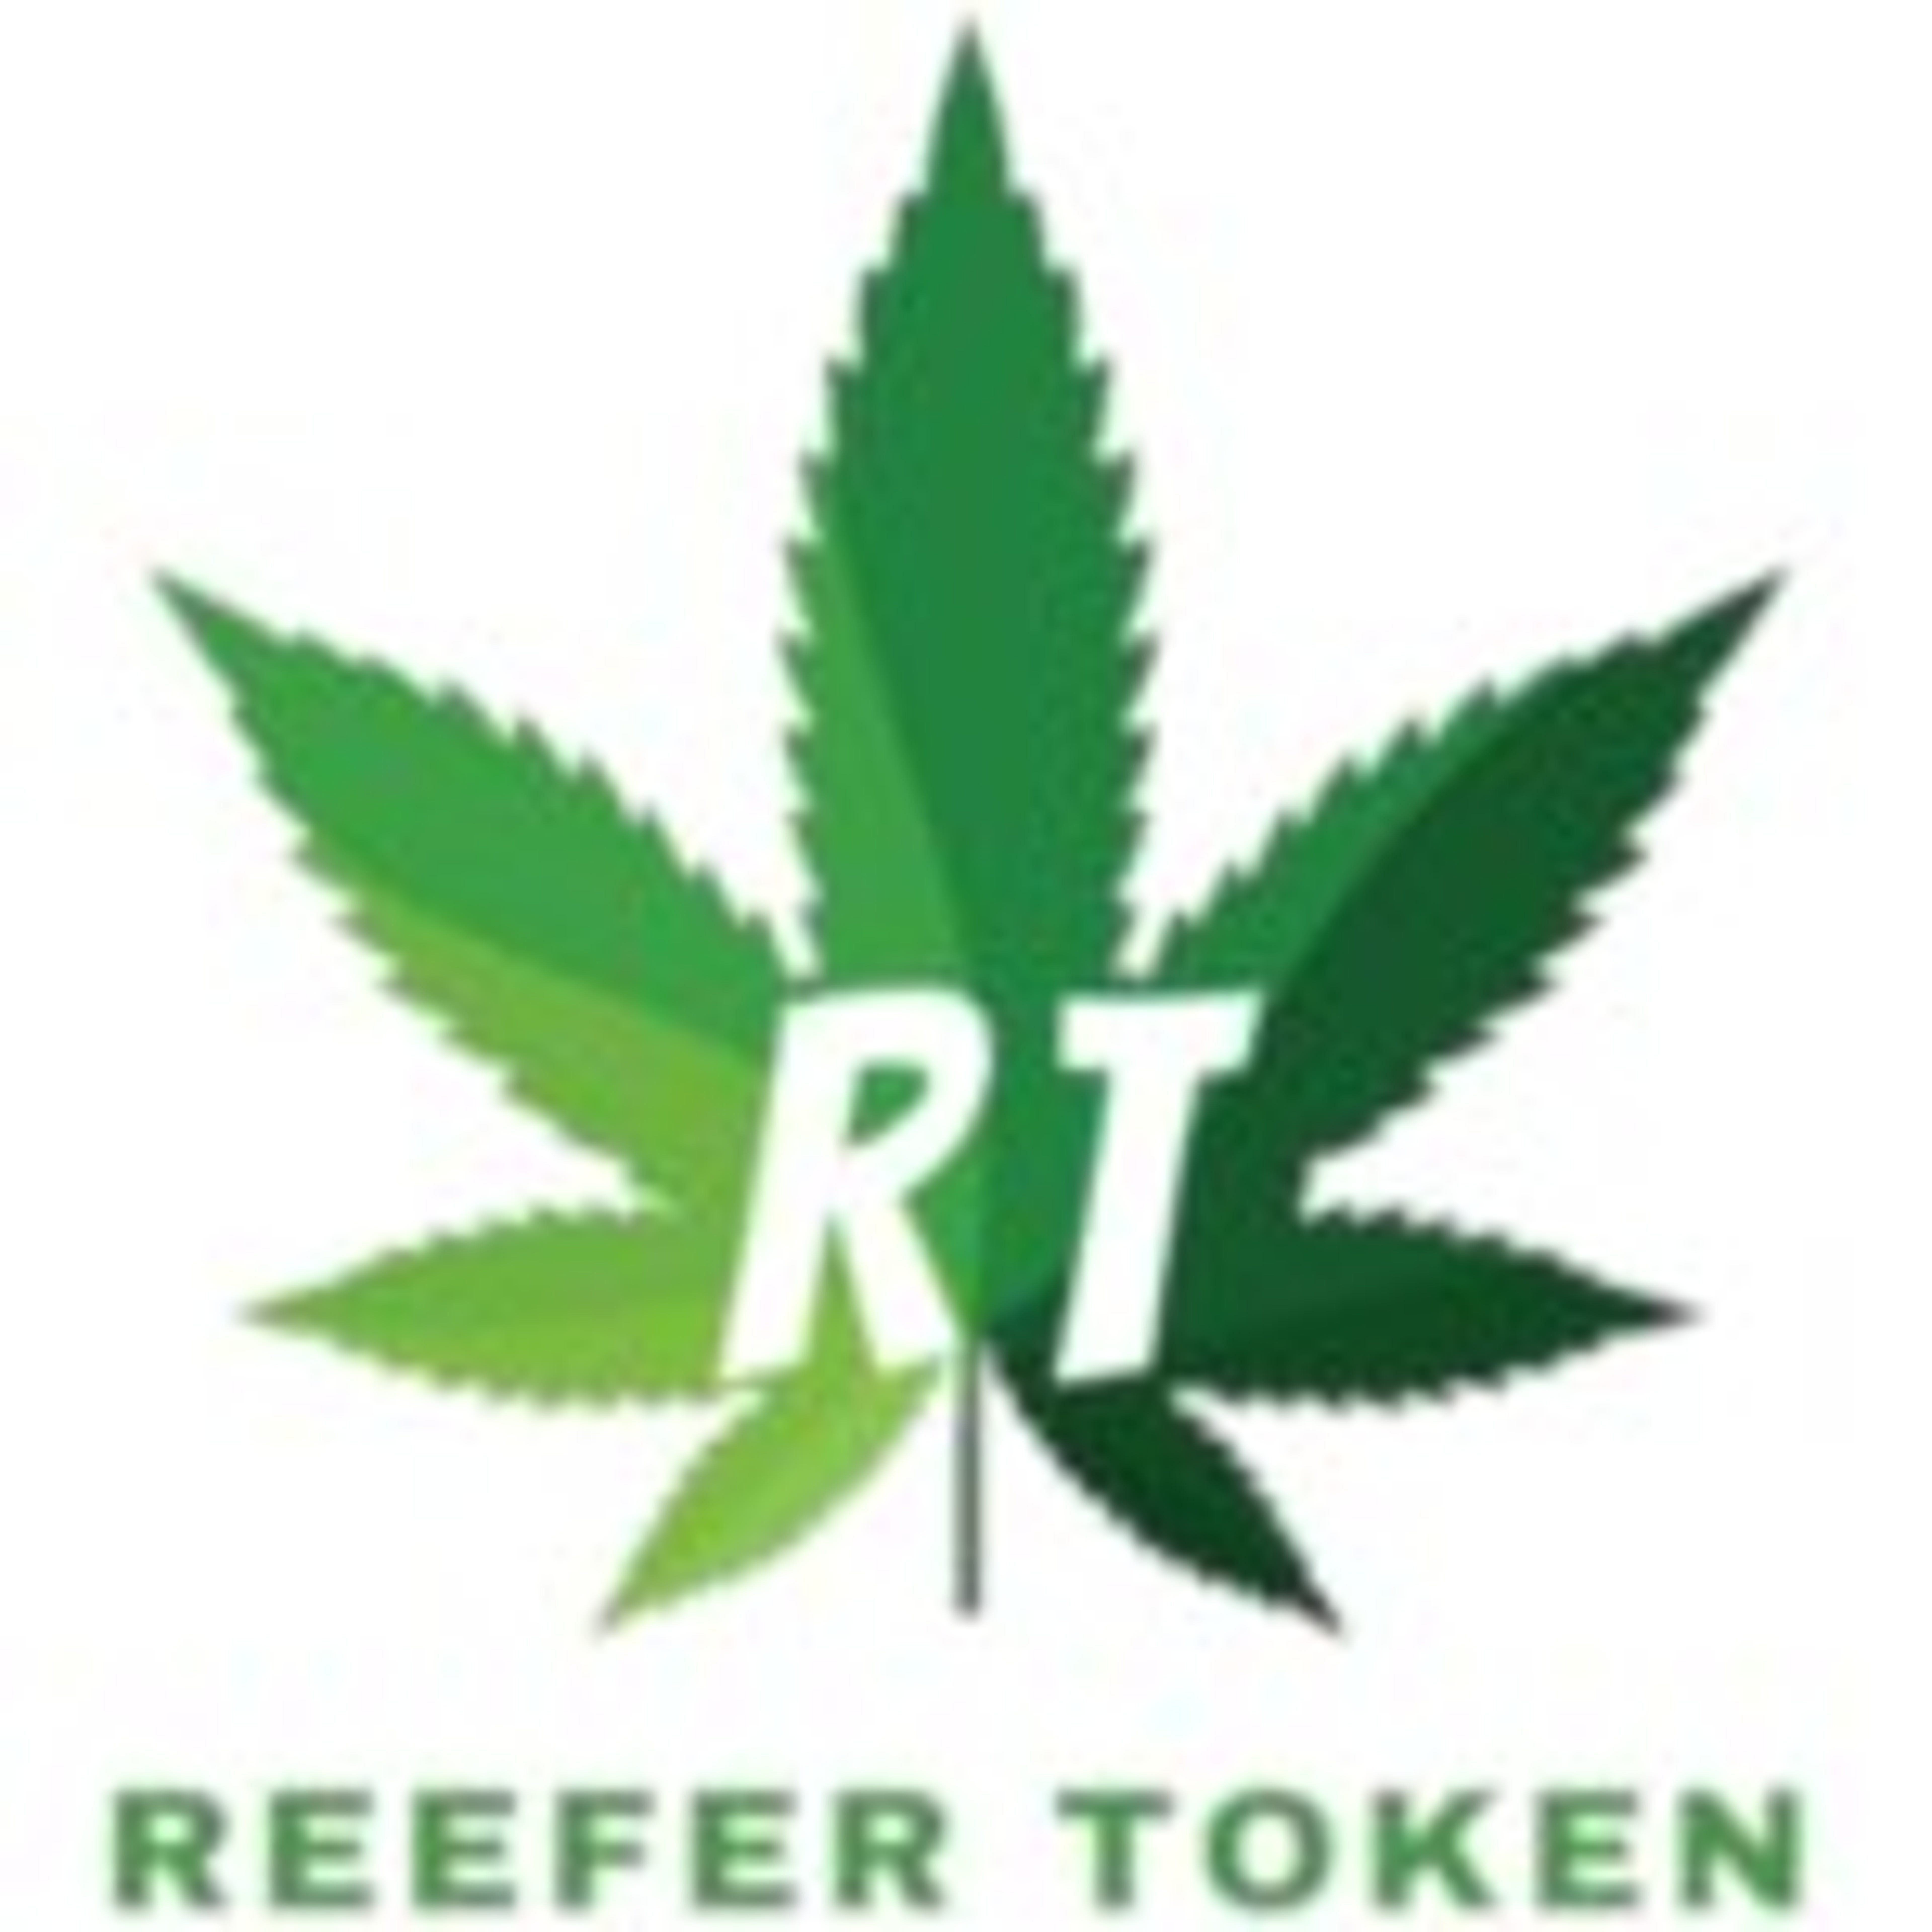 REEFER Token&#39;s Exclusive Agreement With Cannabis AI Pioneer VisiCann To Be Seed To Sale NFT Partner